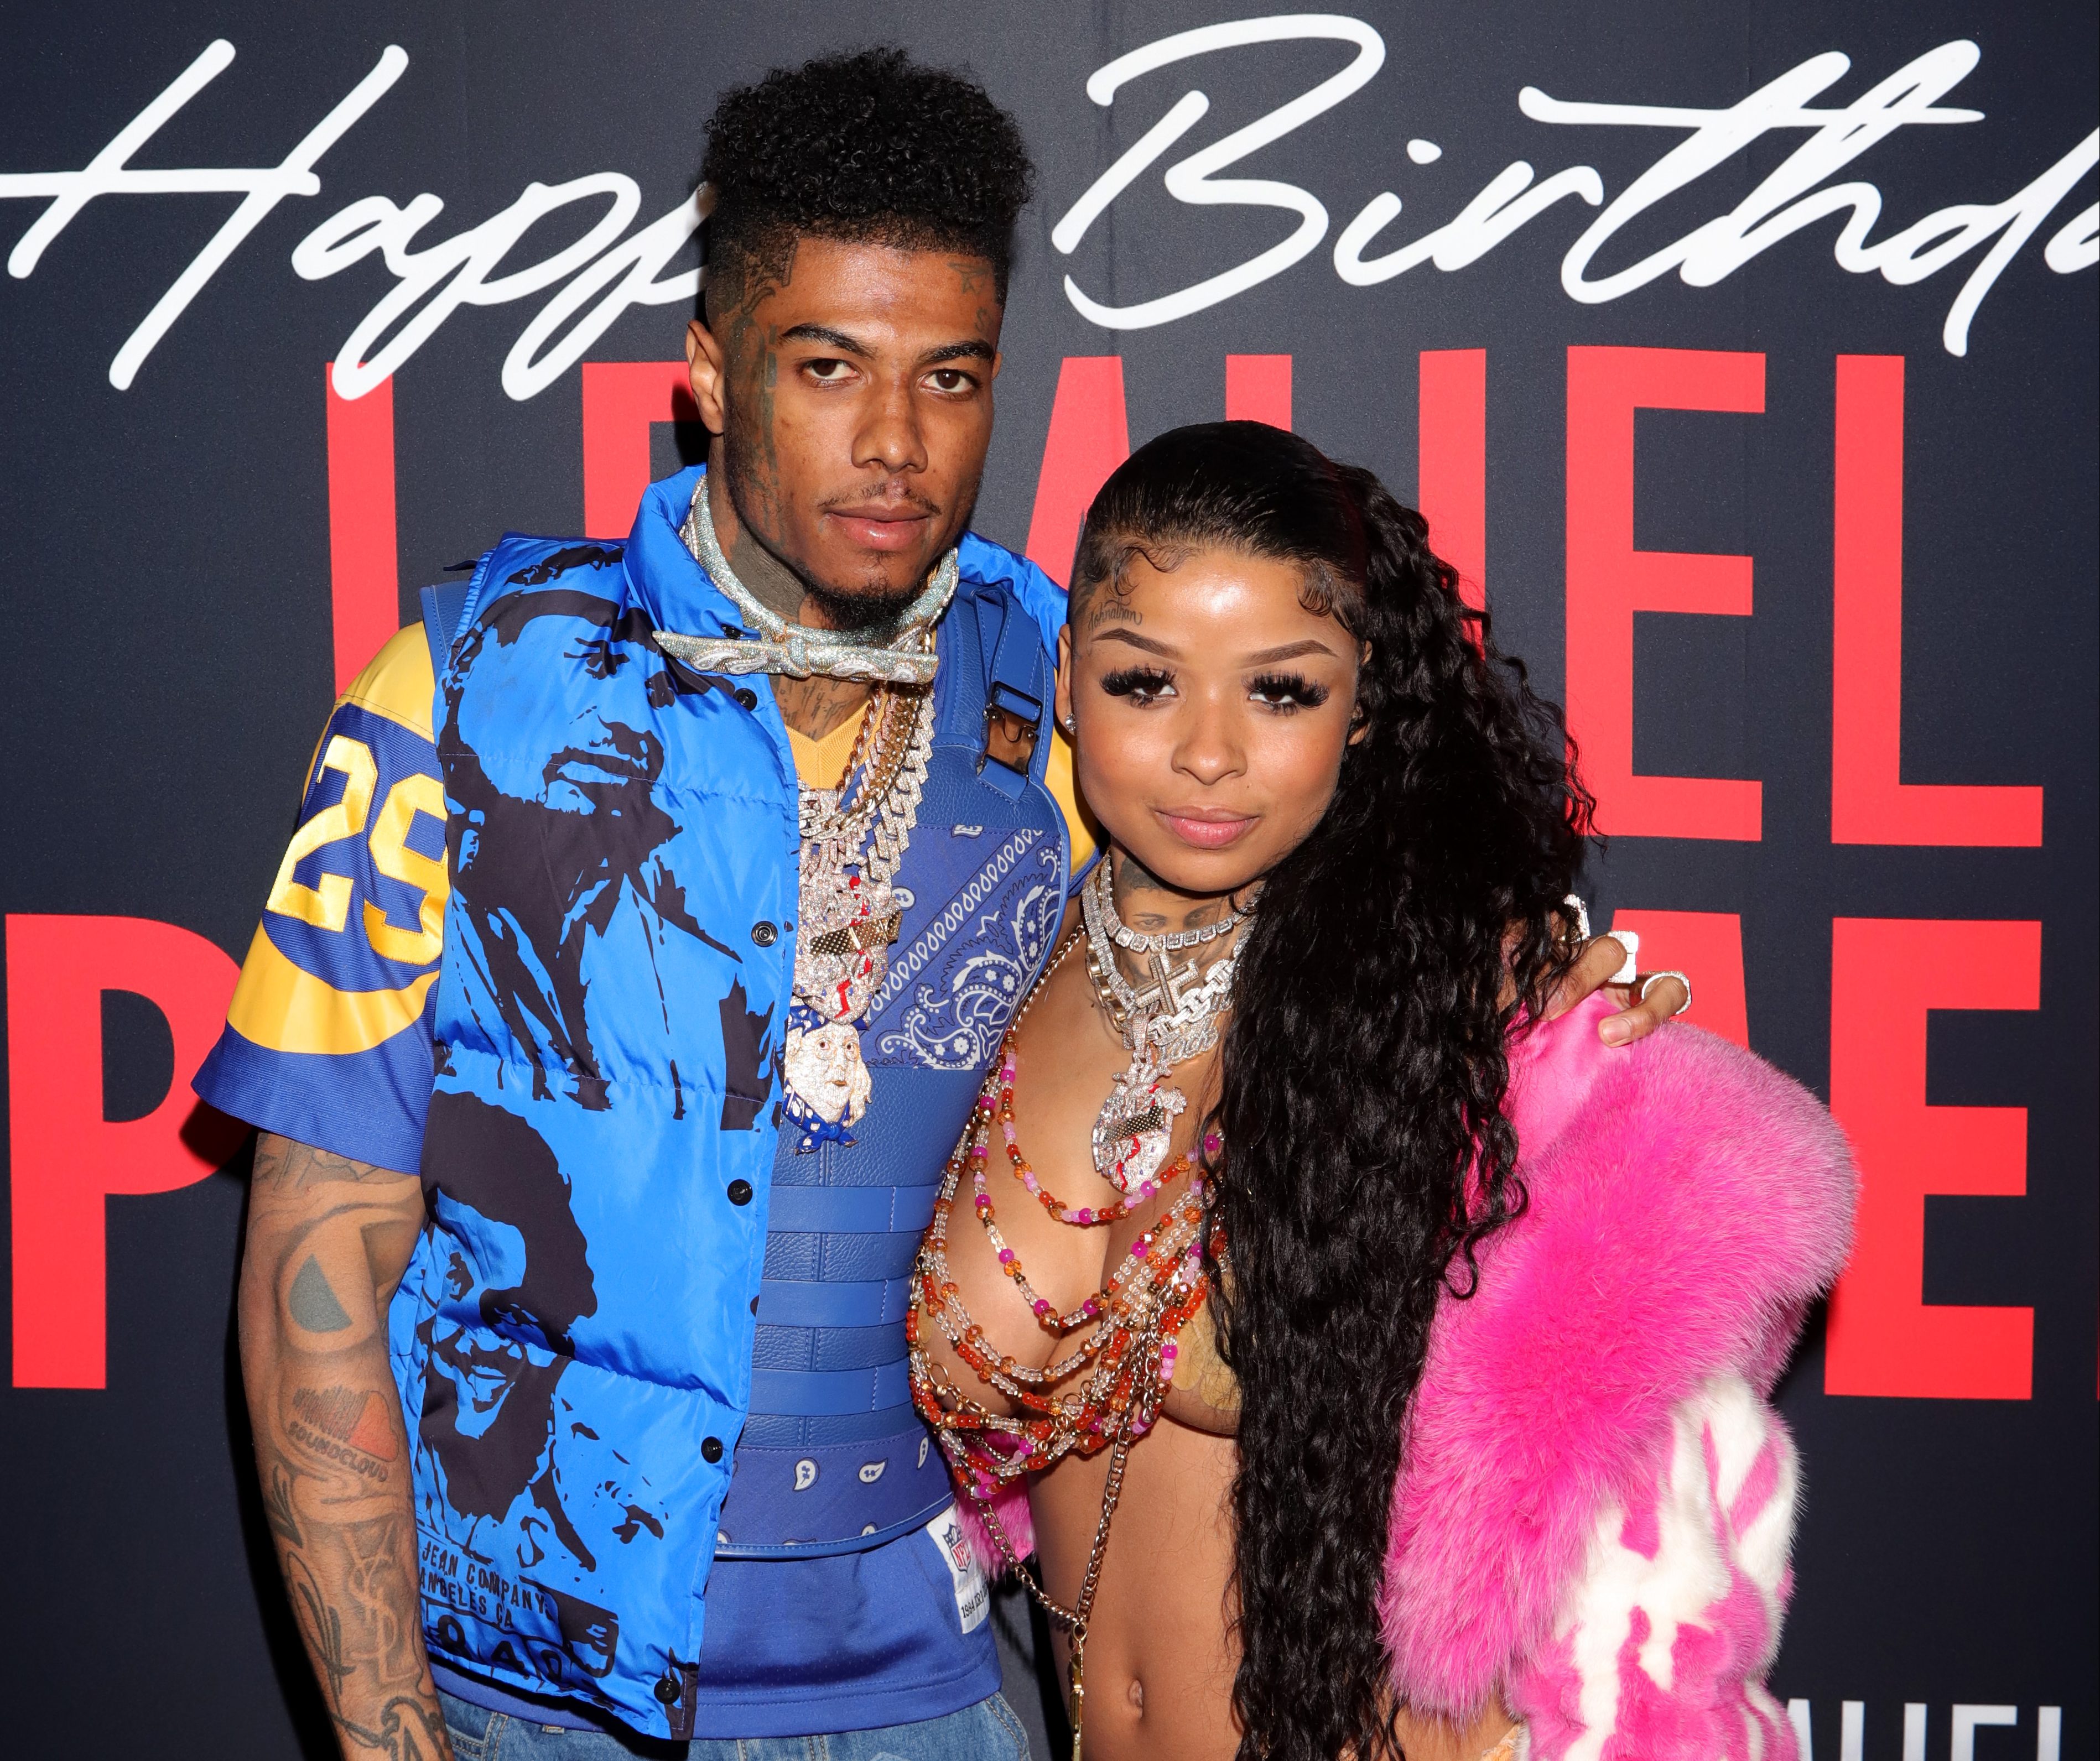 Blueface Reacts To Twitter Assuming He Was Shading Chrisean Rock With Bitter Post